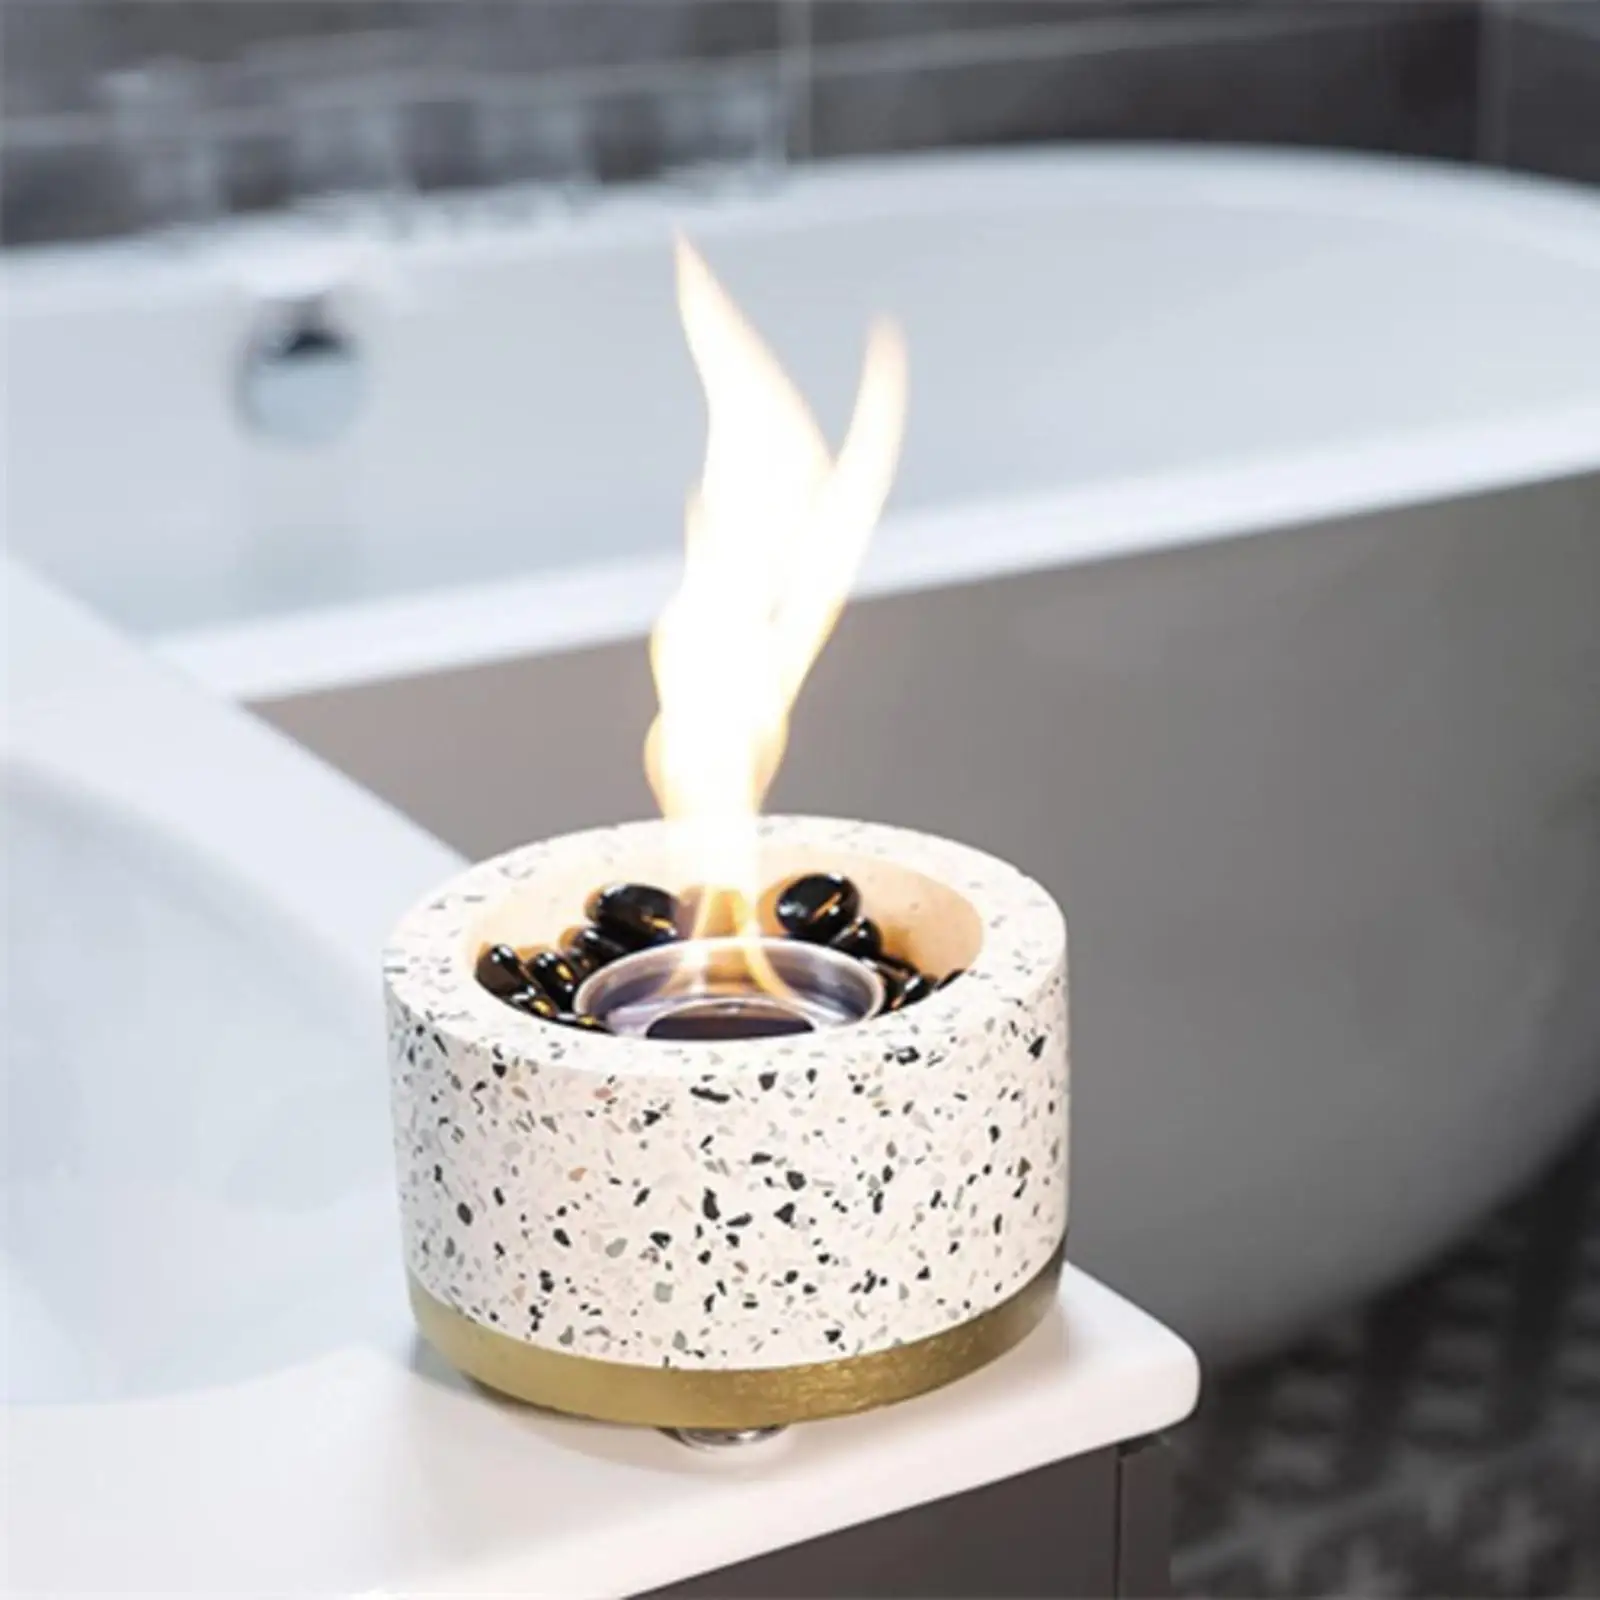 Tabletop Rubbing Alcohol Fireplace Flame Bowl for Home Decor